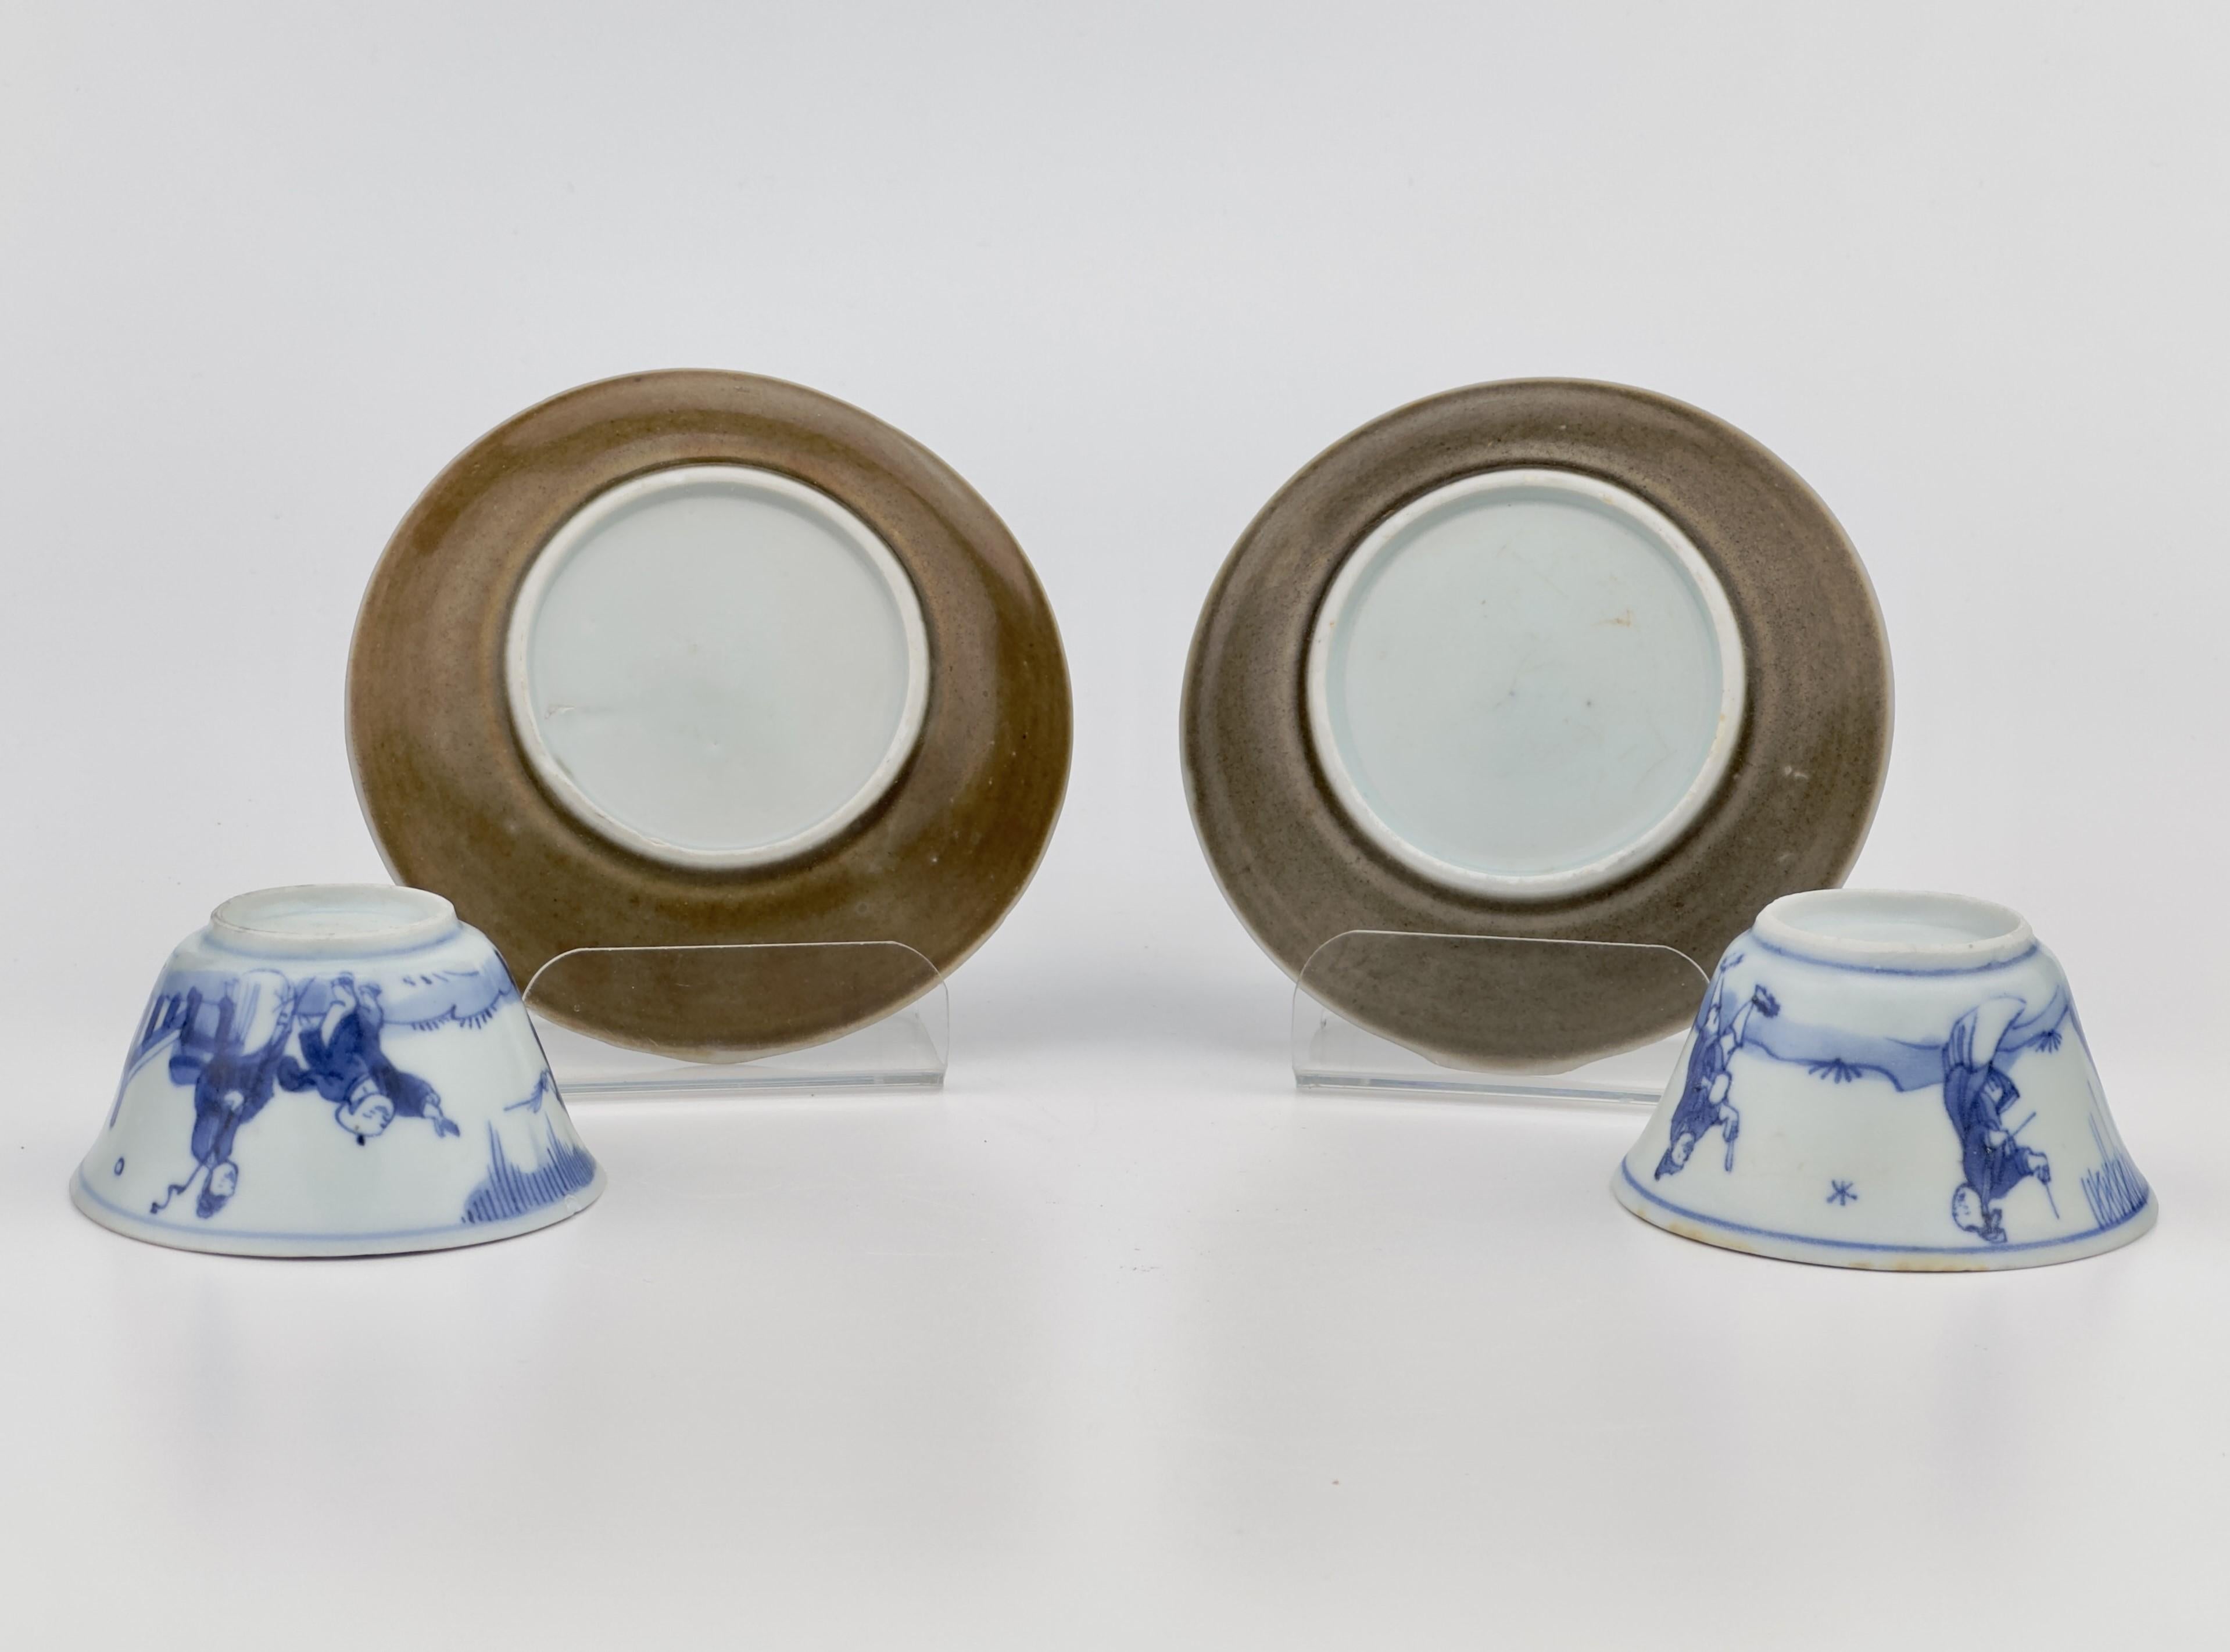 Chinese Blue and White Tea Set c 1725, Qing Dynasty, Yongzheng Reign For Sale